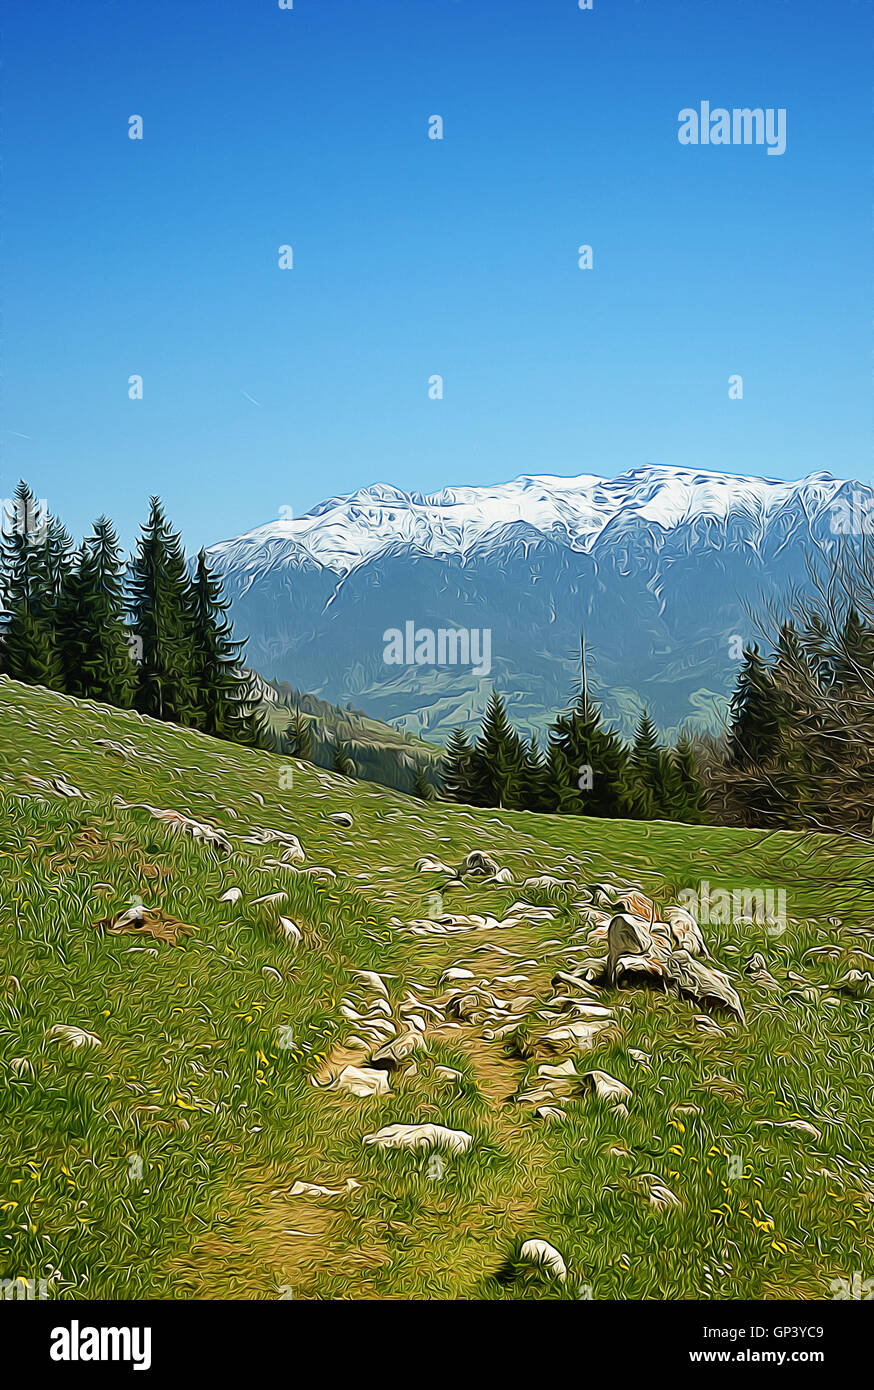 Illustration of mounts in a sunny spring day with a clear blue sky Stock Photo